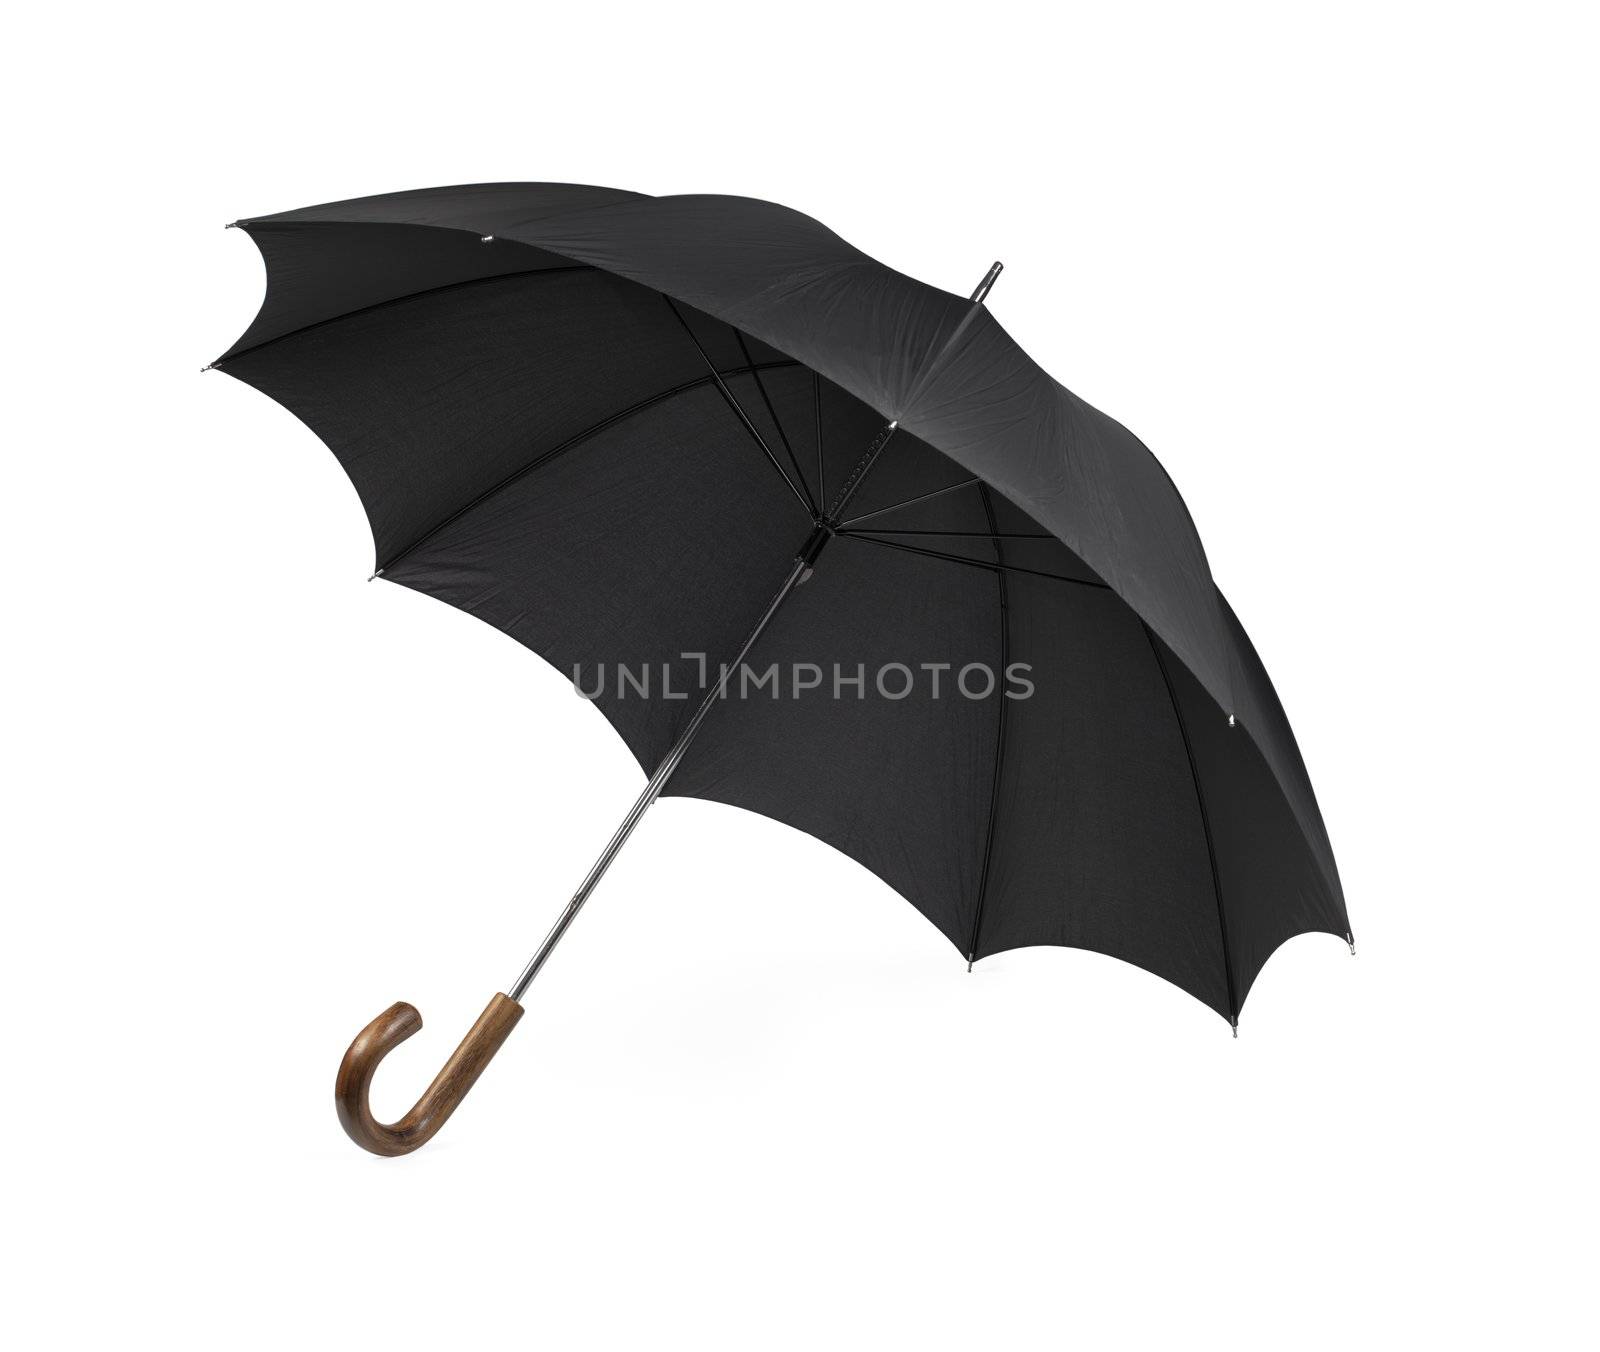 Black vintage umbrella isolated on white with some natural shadows.